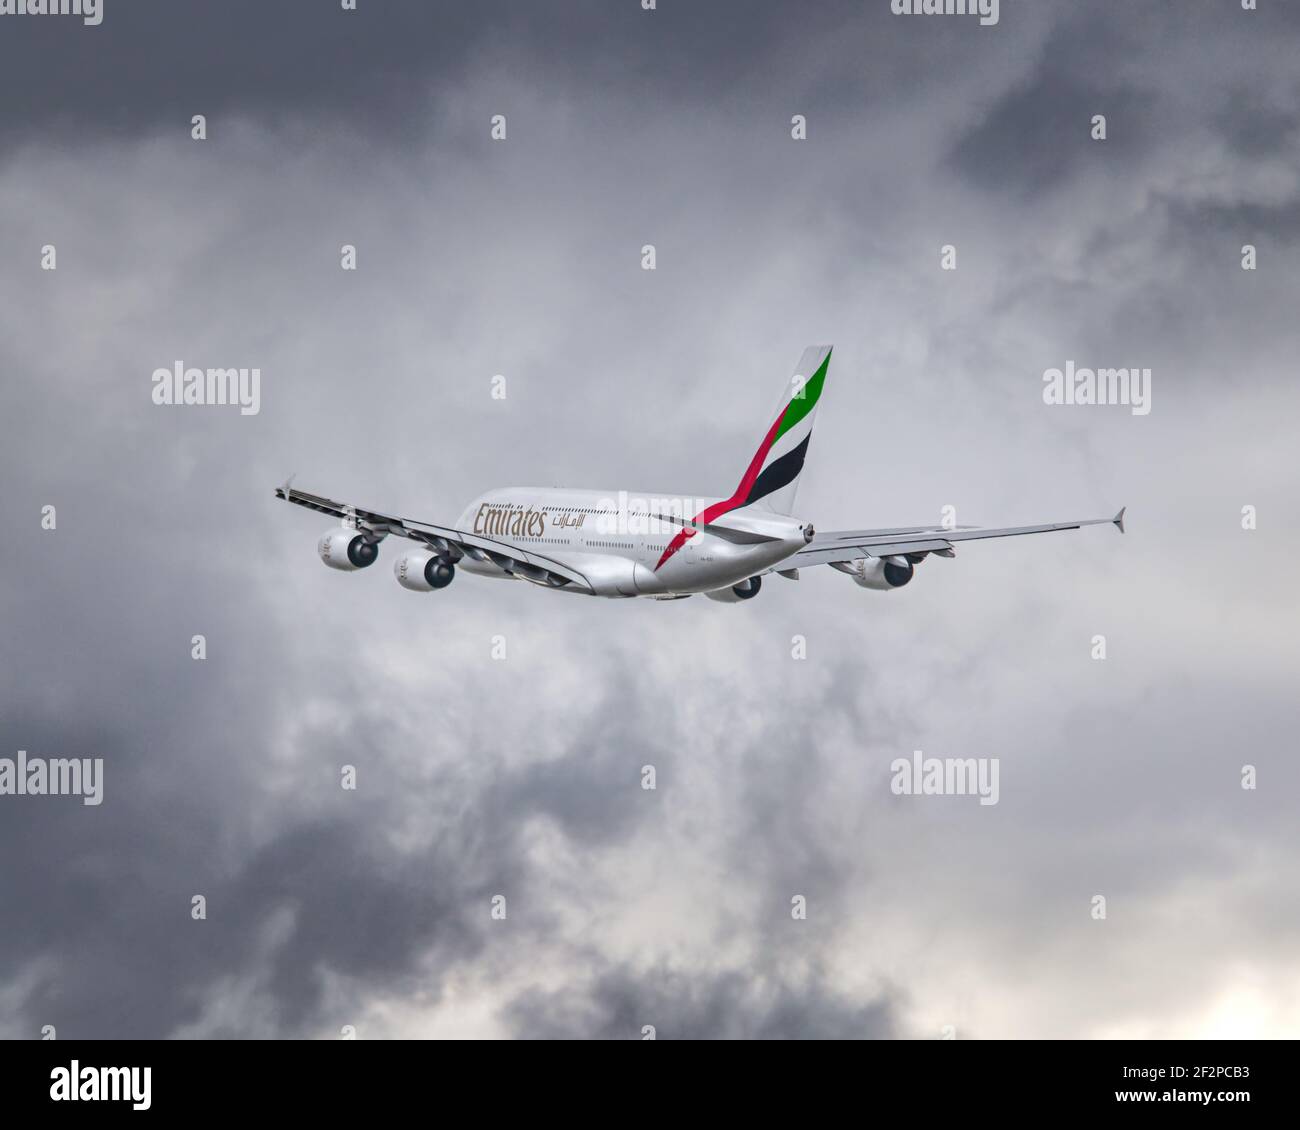 London, Heathrow Airport - August 18, 2019: Dramatic shot of an Emirates A380 flying towards bad weather with dark thunderous rain clouds. image Abdul Stock Photo